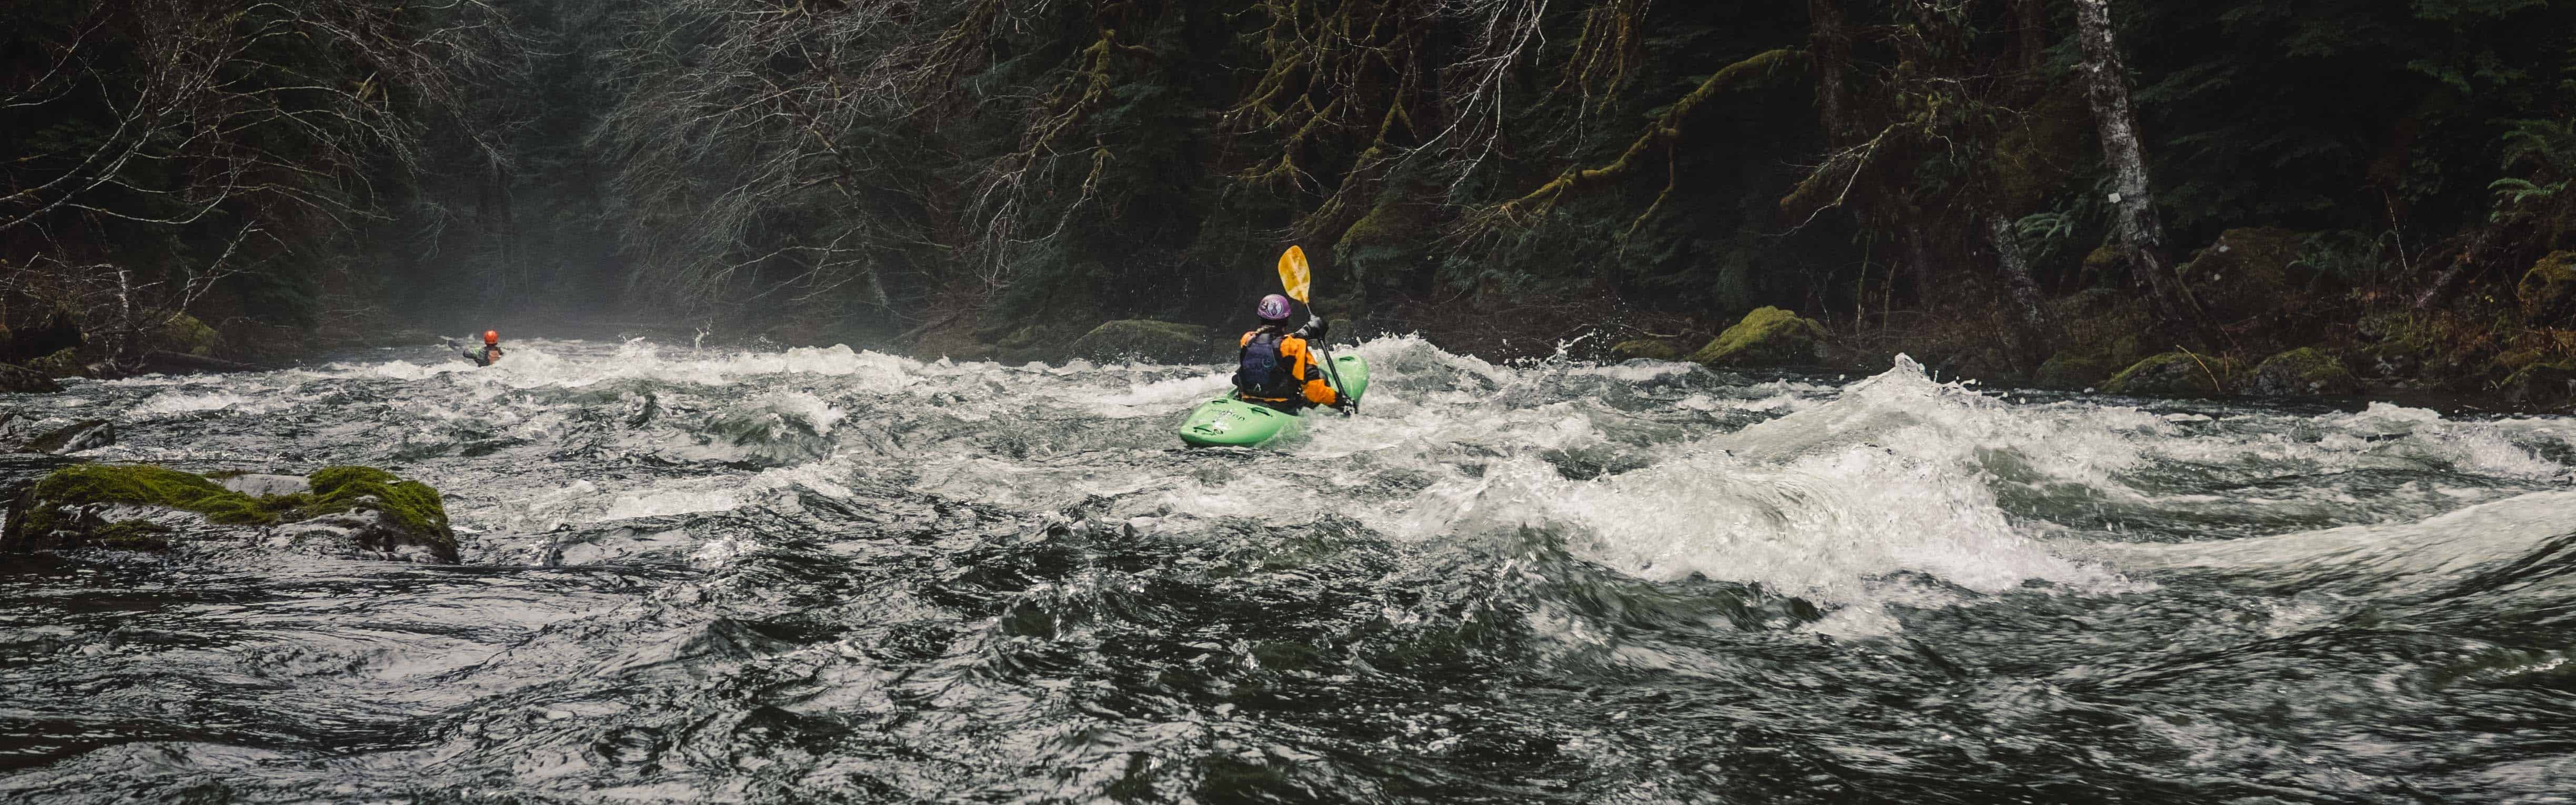 Sol Duc River Kayakers | Photo by Nate Wilson